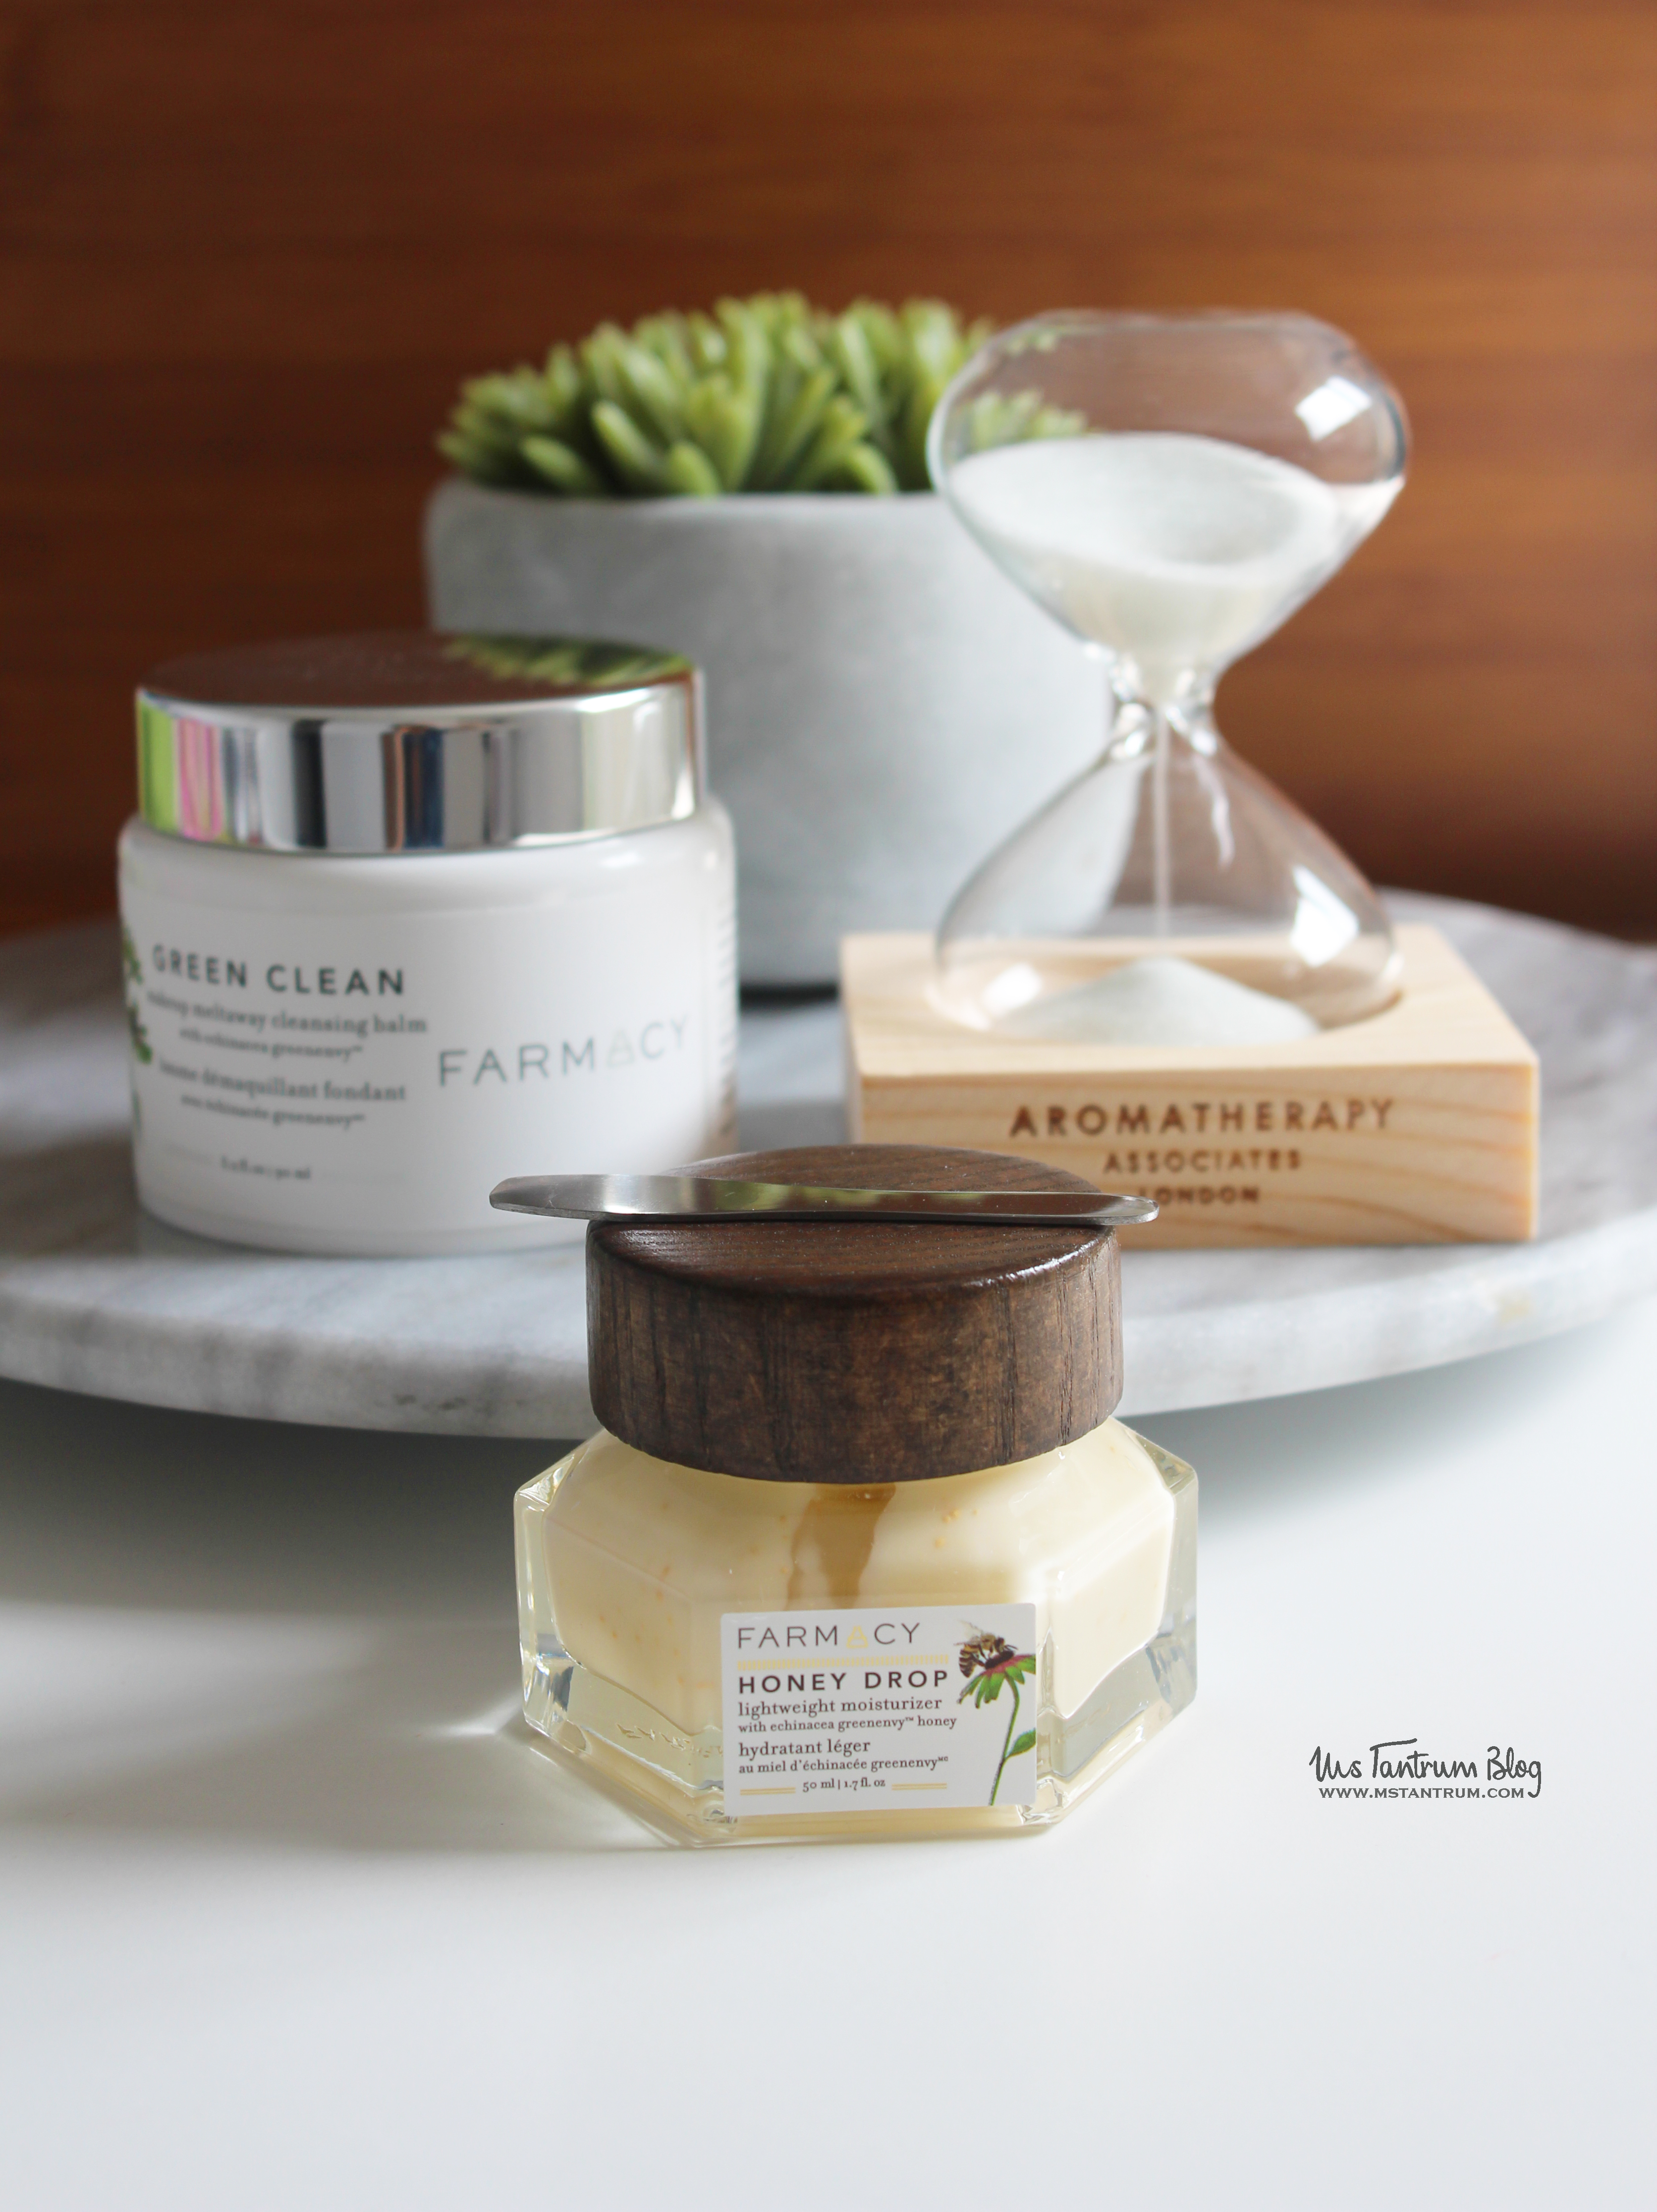 Farmacy Beauty - Green Clean Cleansing Balm and Honey Drop Moisturizer Review on Ms Tantrum Blog